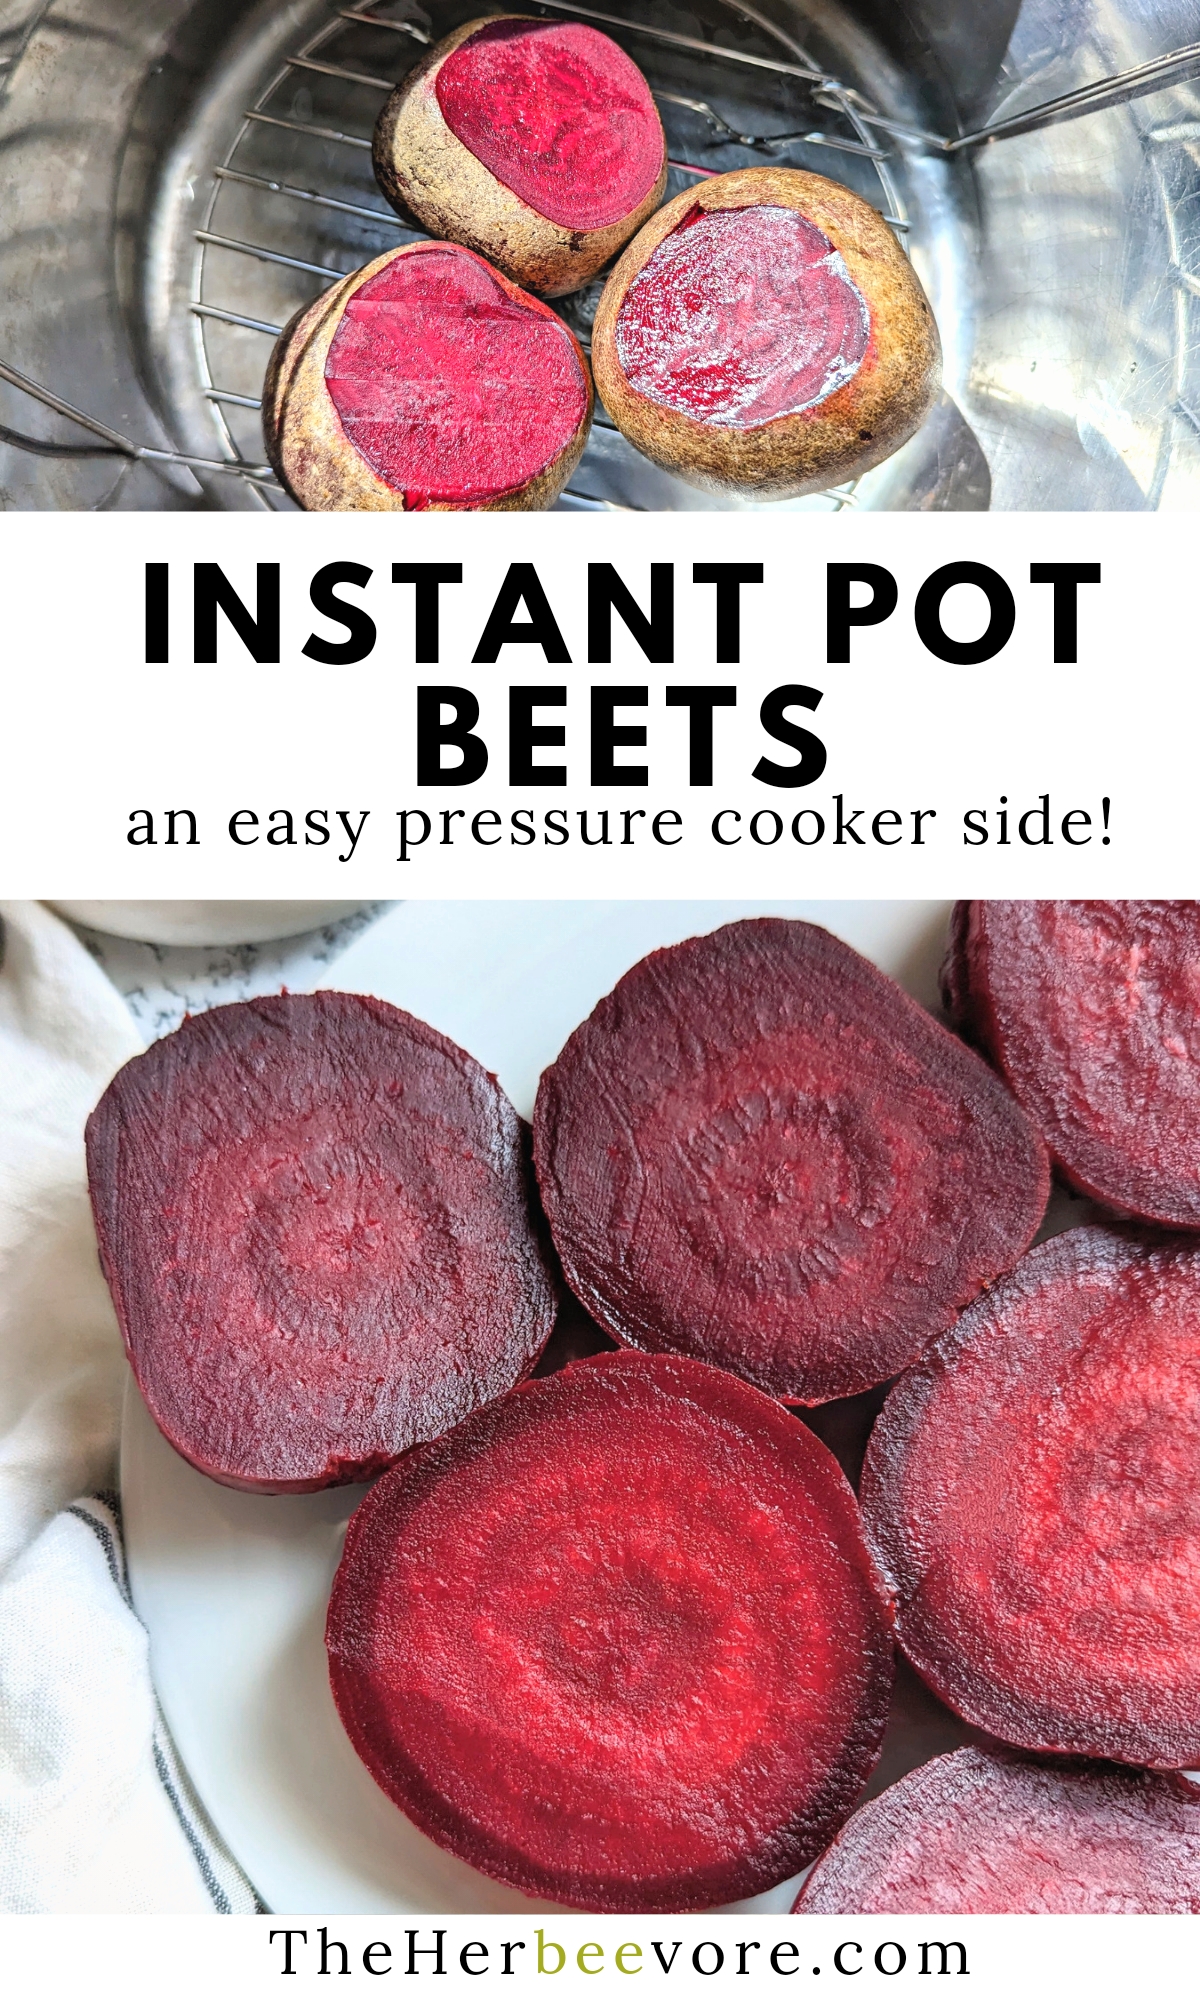 instant pot beets recipe easy pressure cooker beet recipe ways to cook beets without an oven